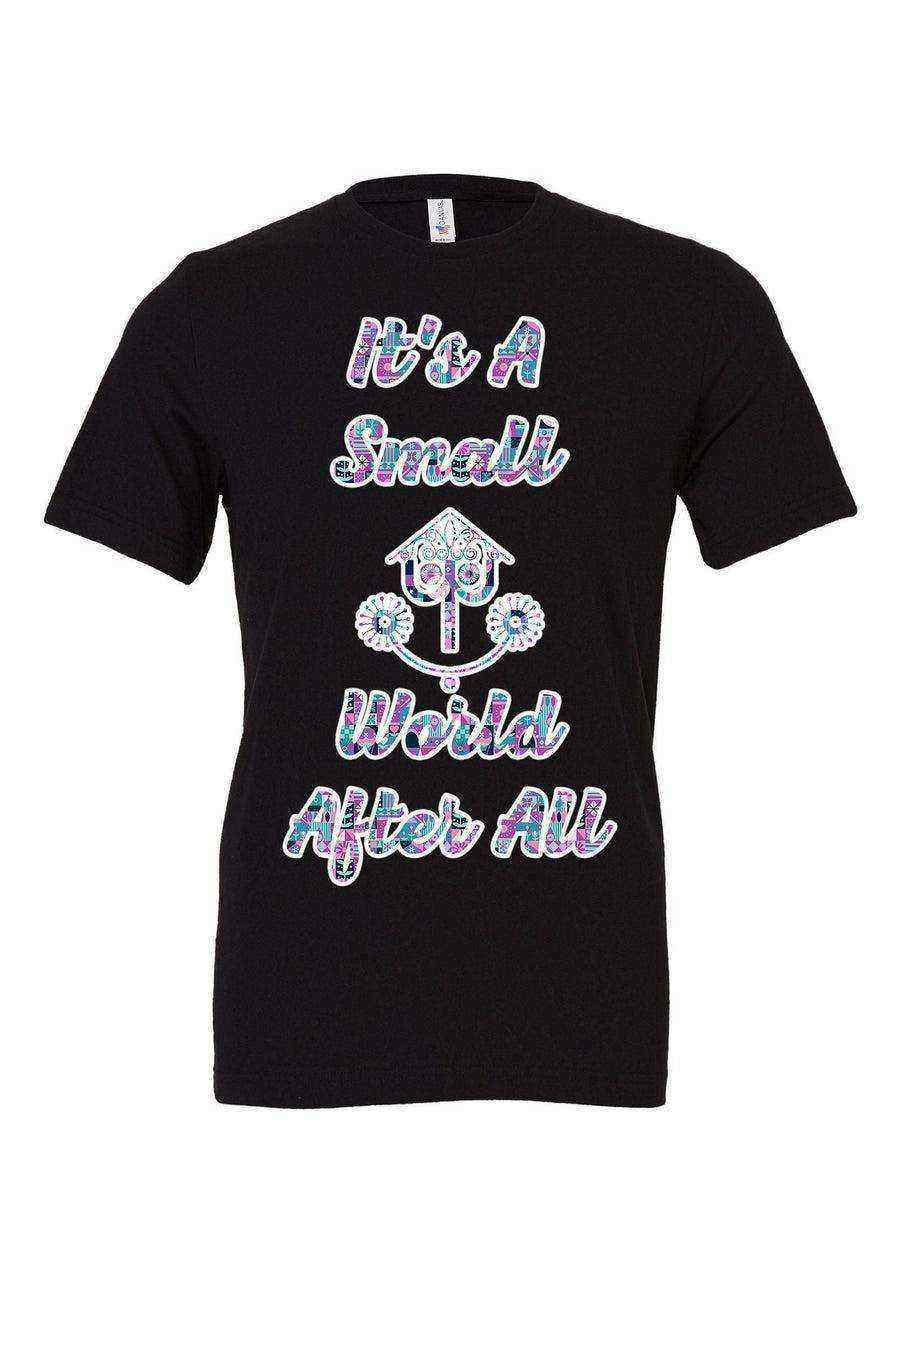 Its A Small World Dooney Inspired Tee - Dylan's Tees